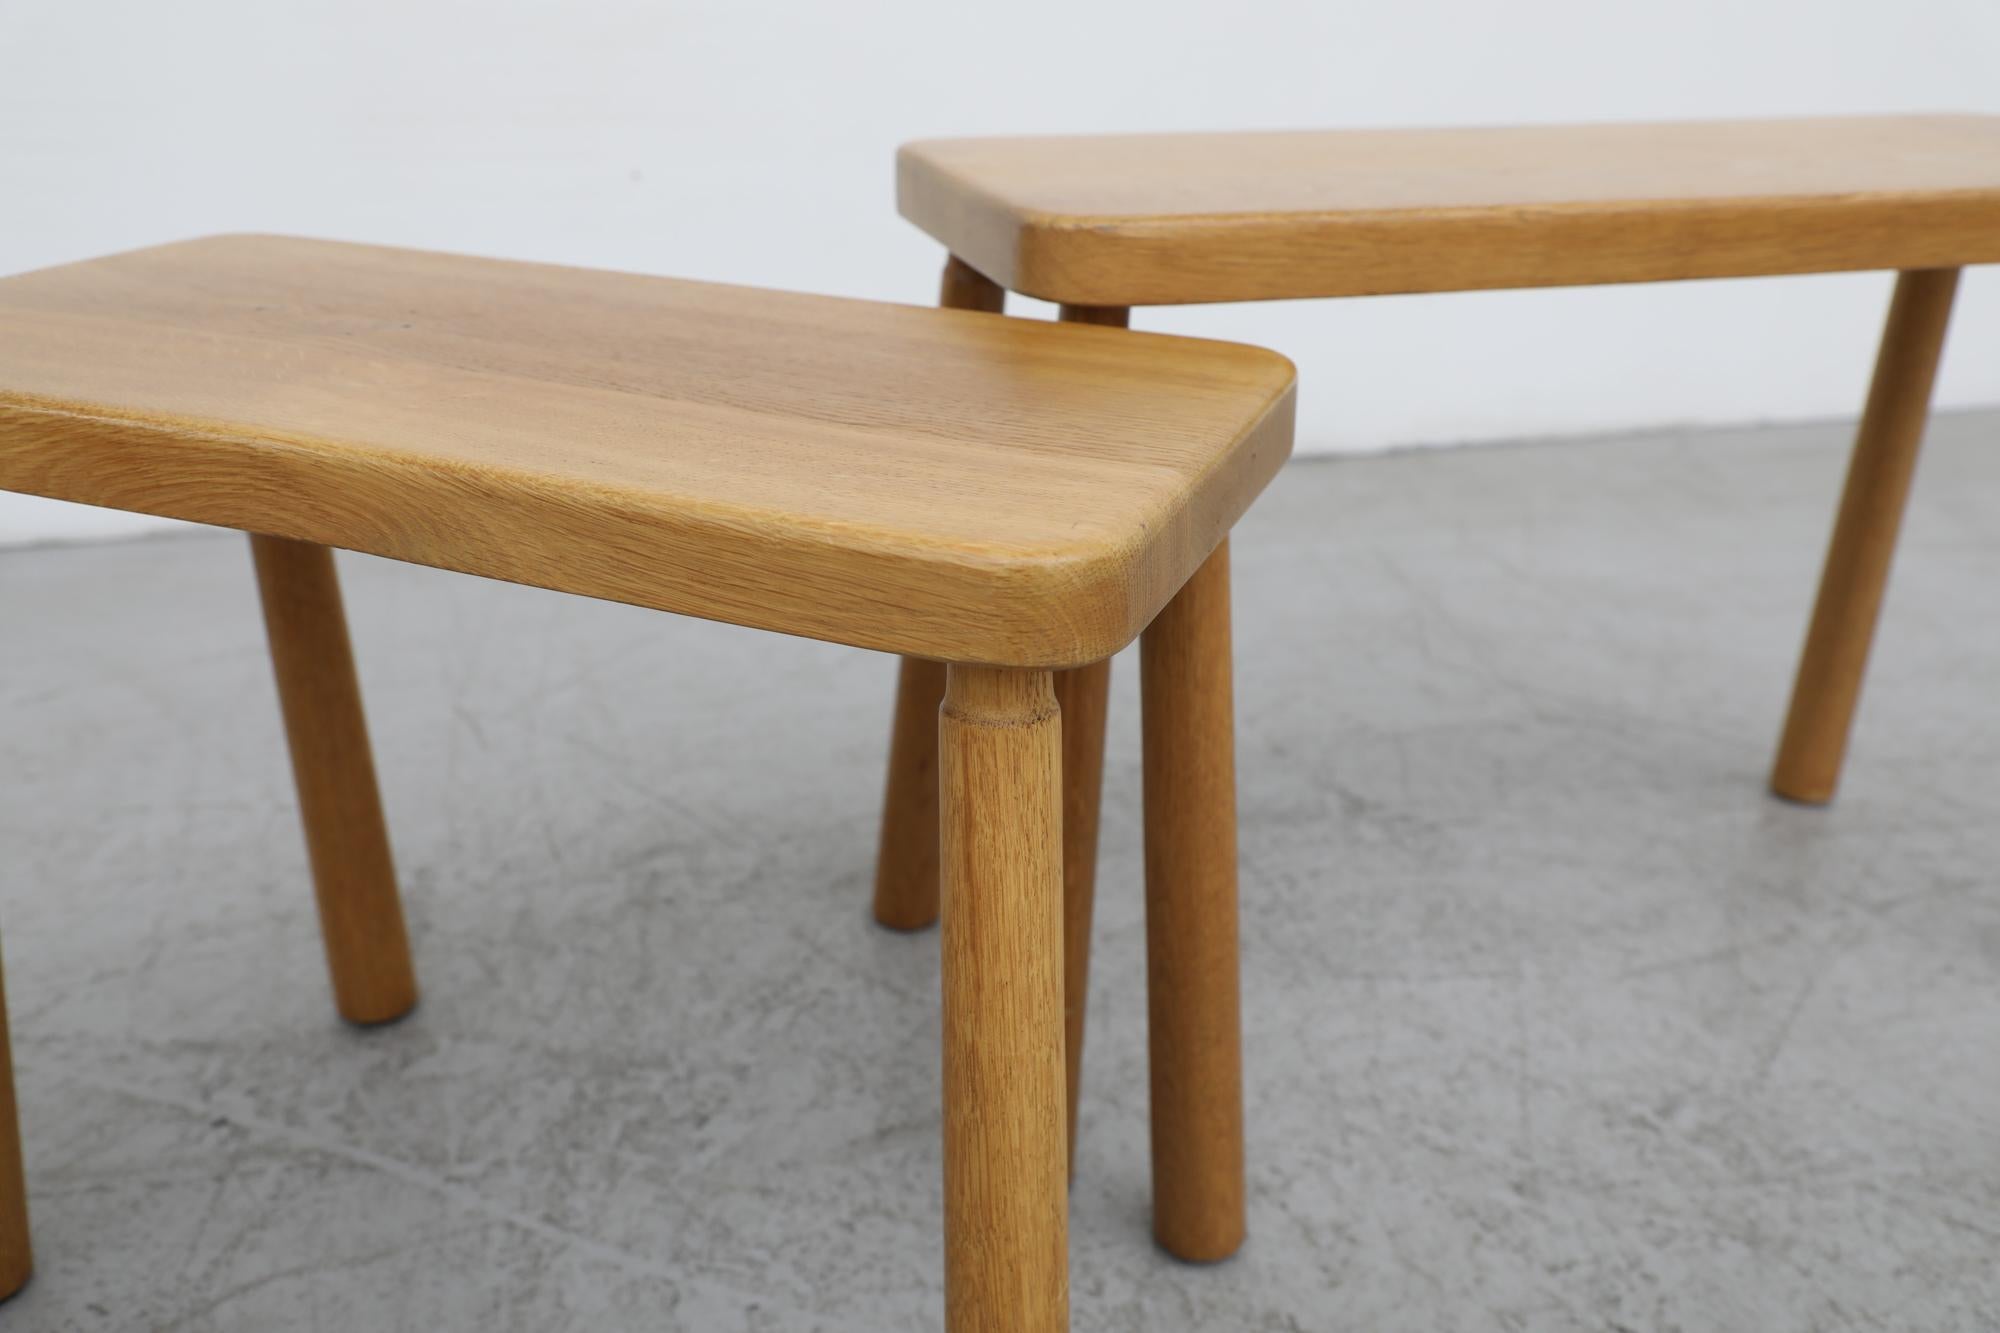 Set of 3 Charlotte Perriand Style Skinny Oak Nesting Tables with Rounded Edges For Sale 9